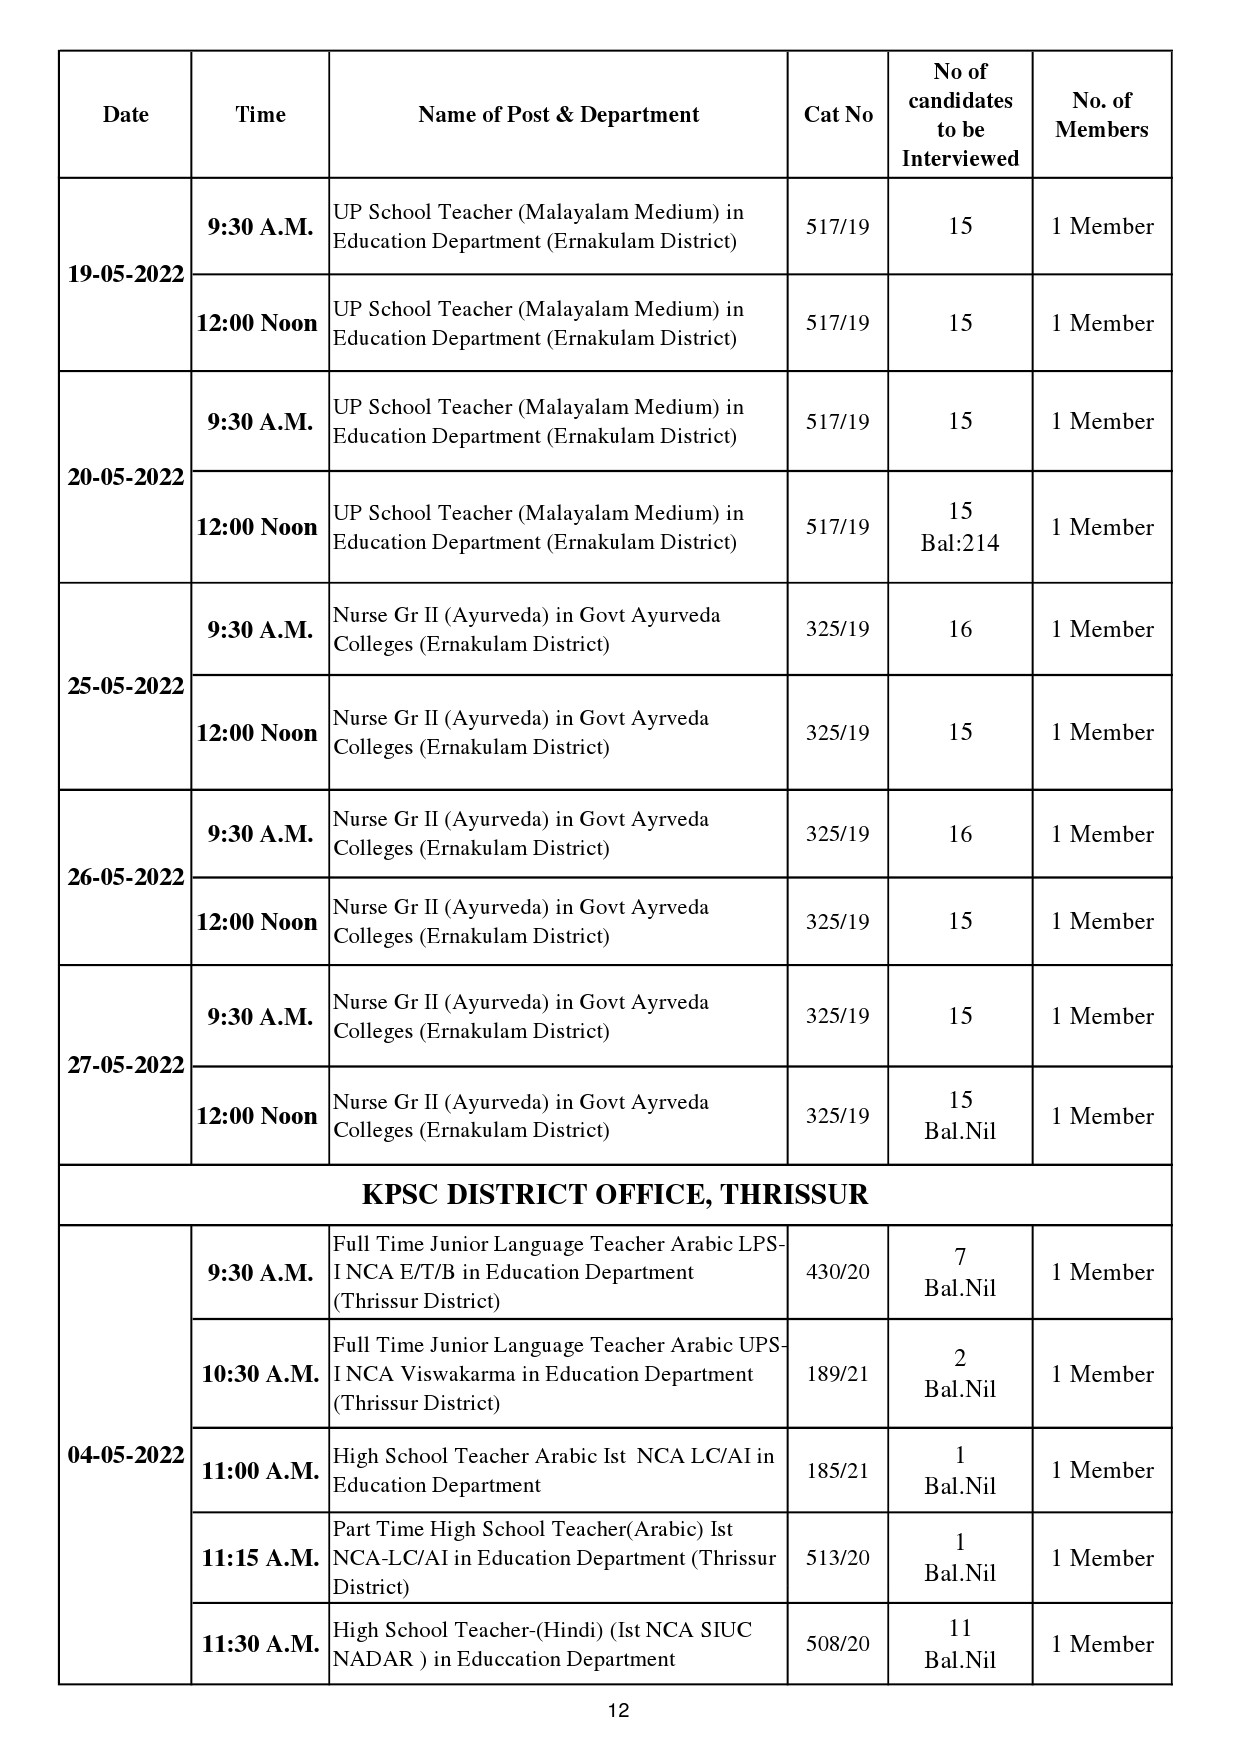 KPSC INTERVIEW PROGRAMME FOR THE MONTH OF MAY 2022 - Notification Image 12